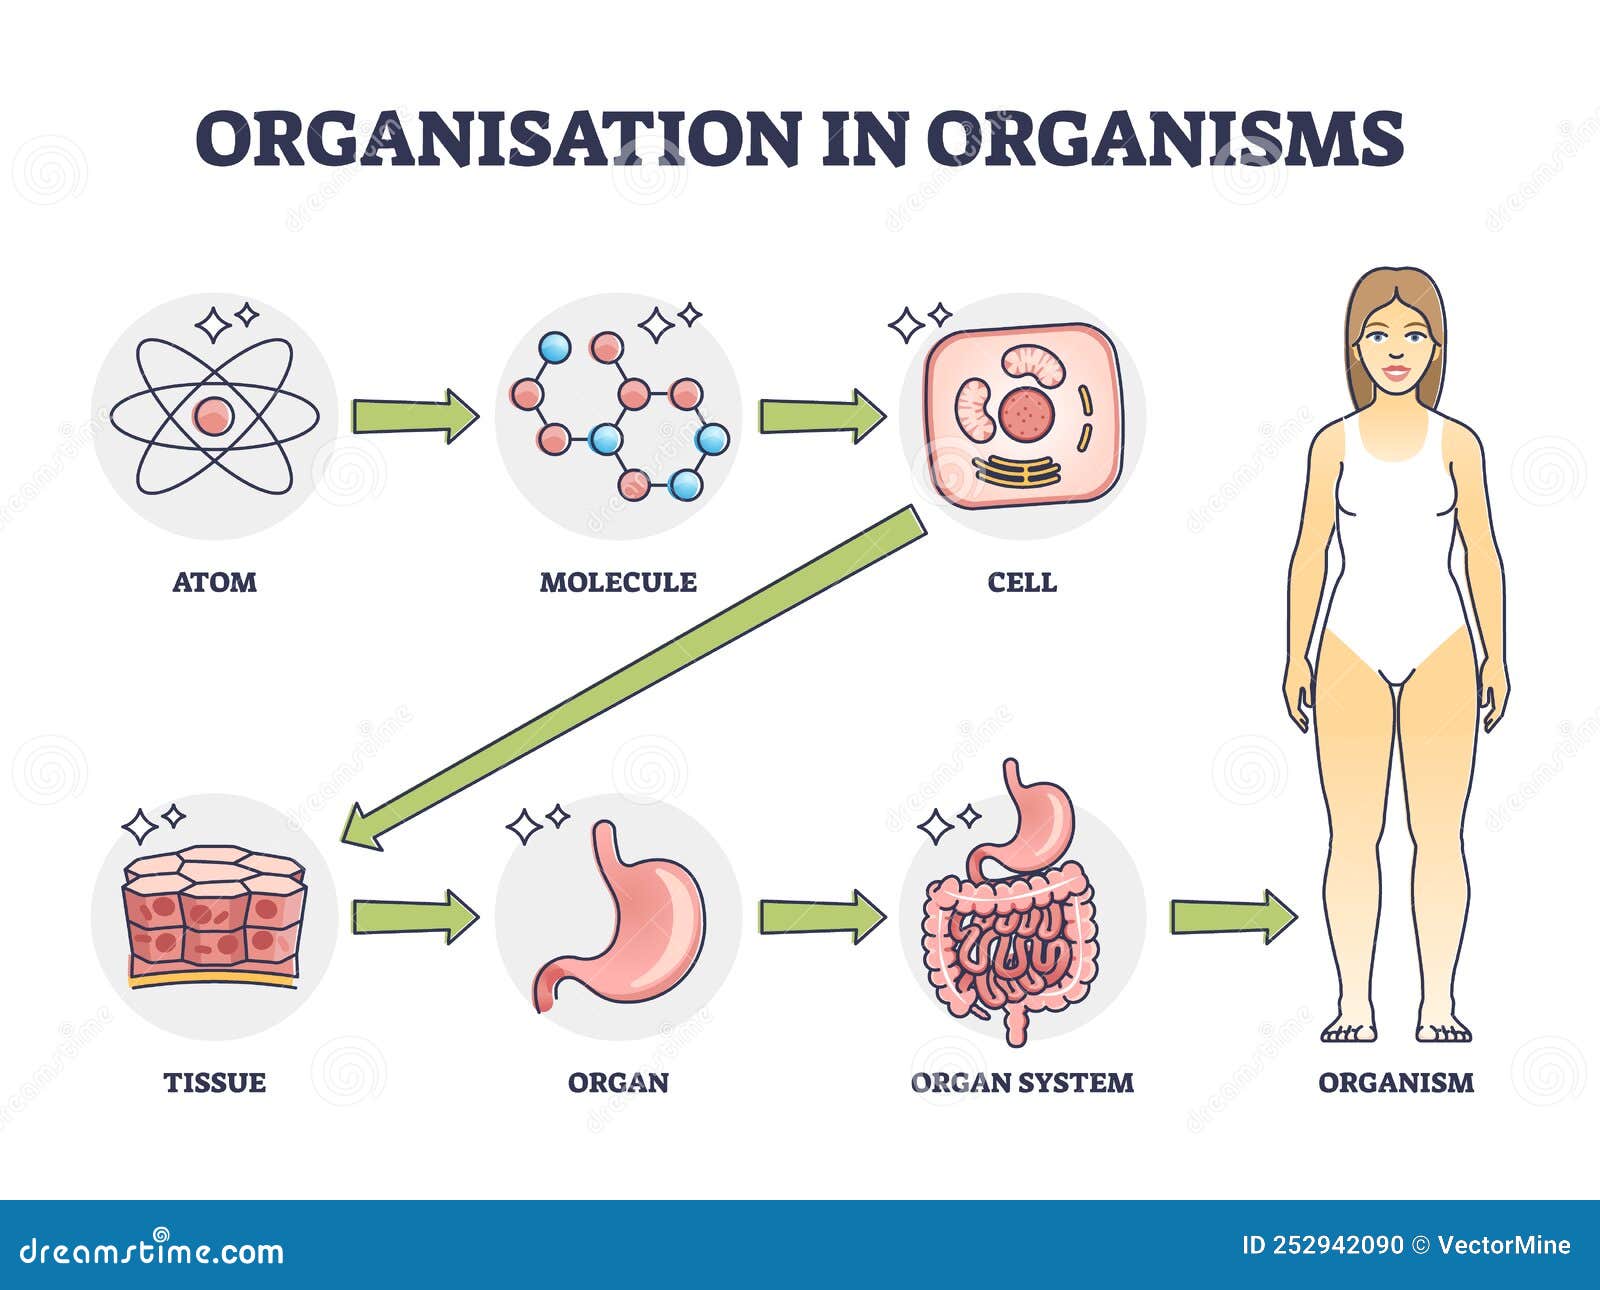 organisation in organisms with hierarchical level structure outline diagram